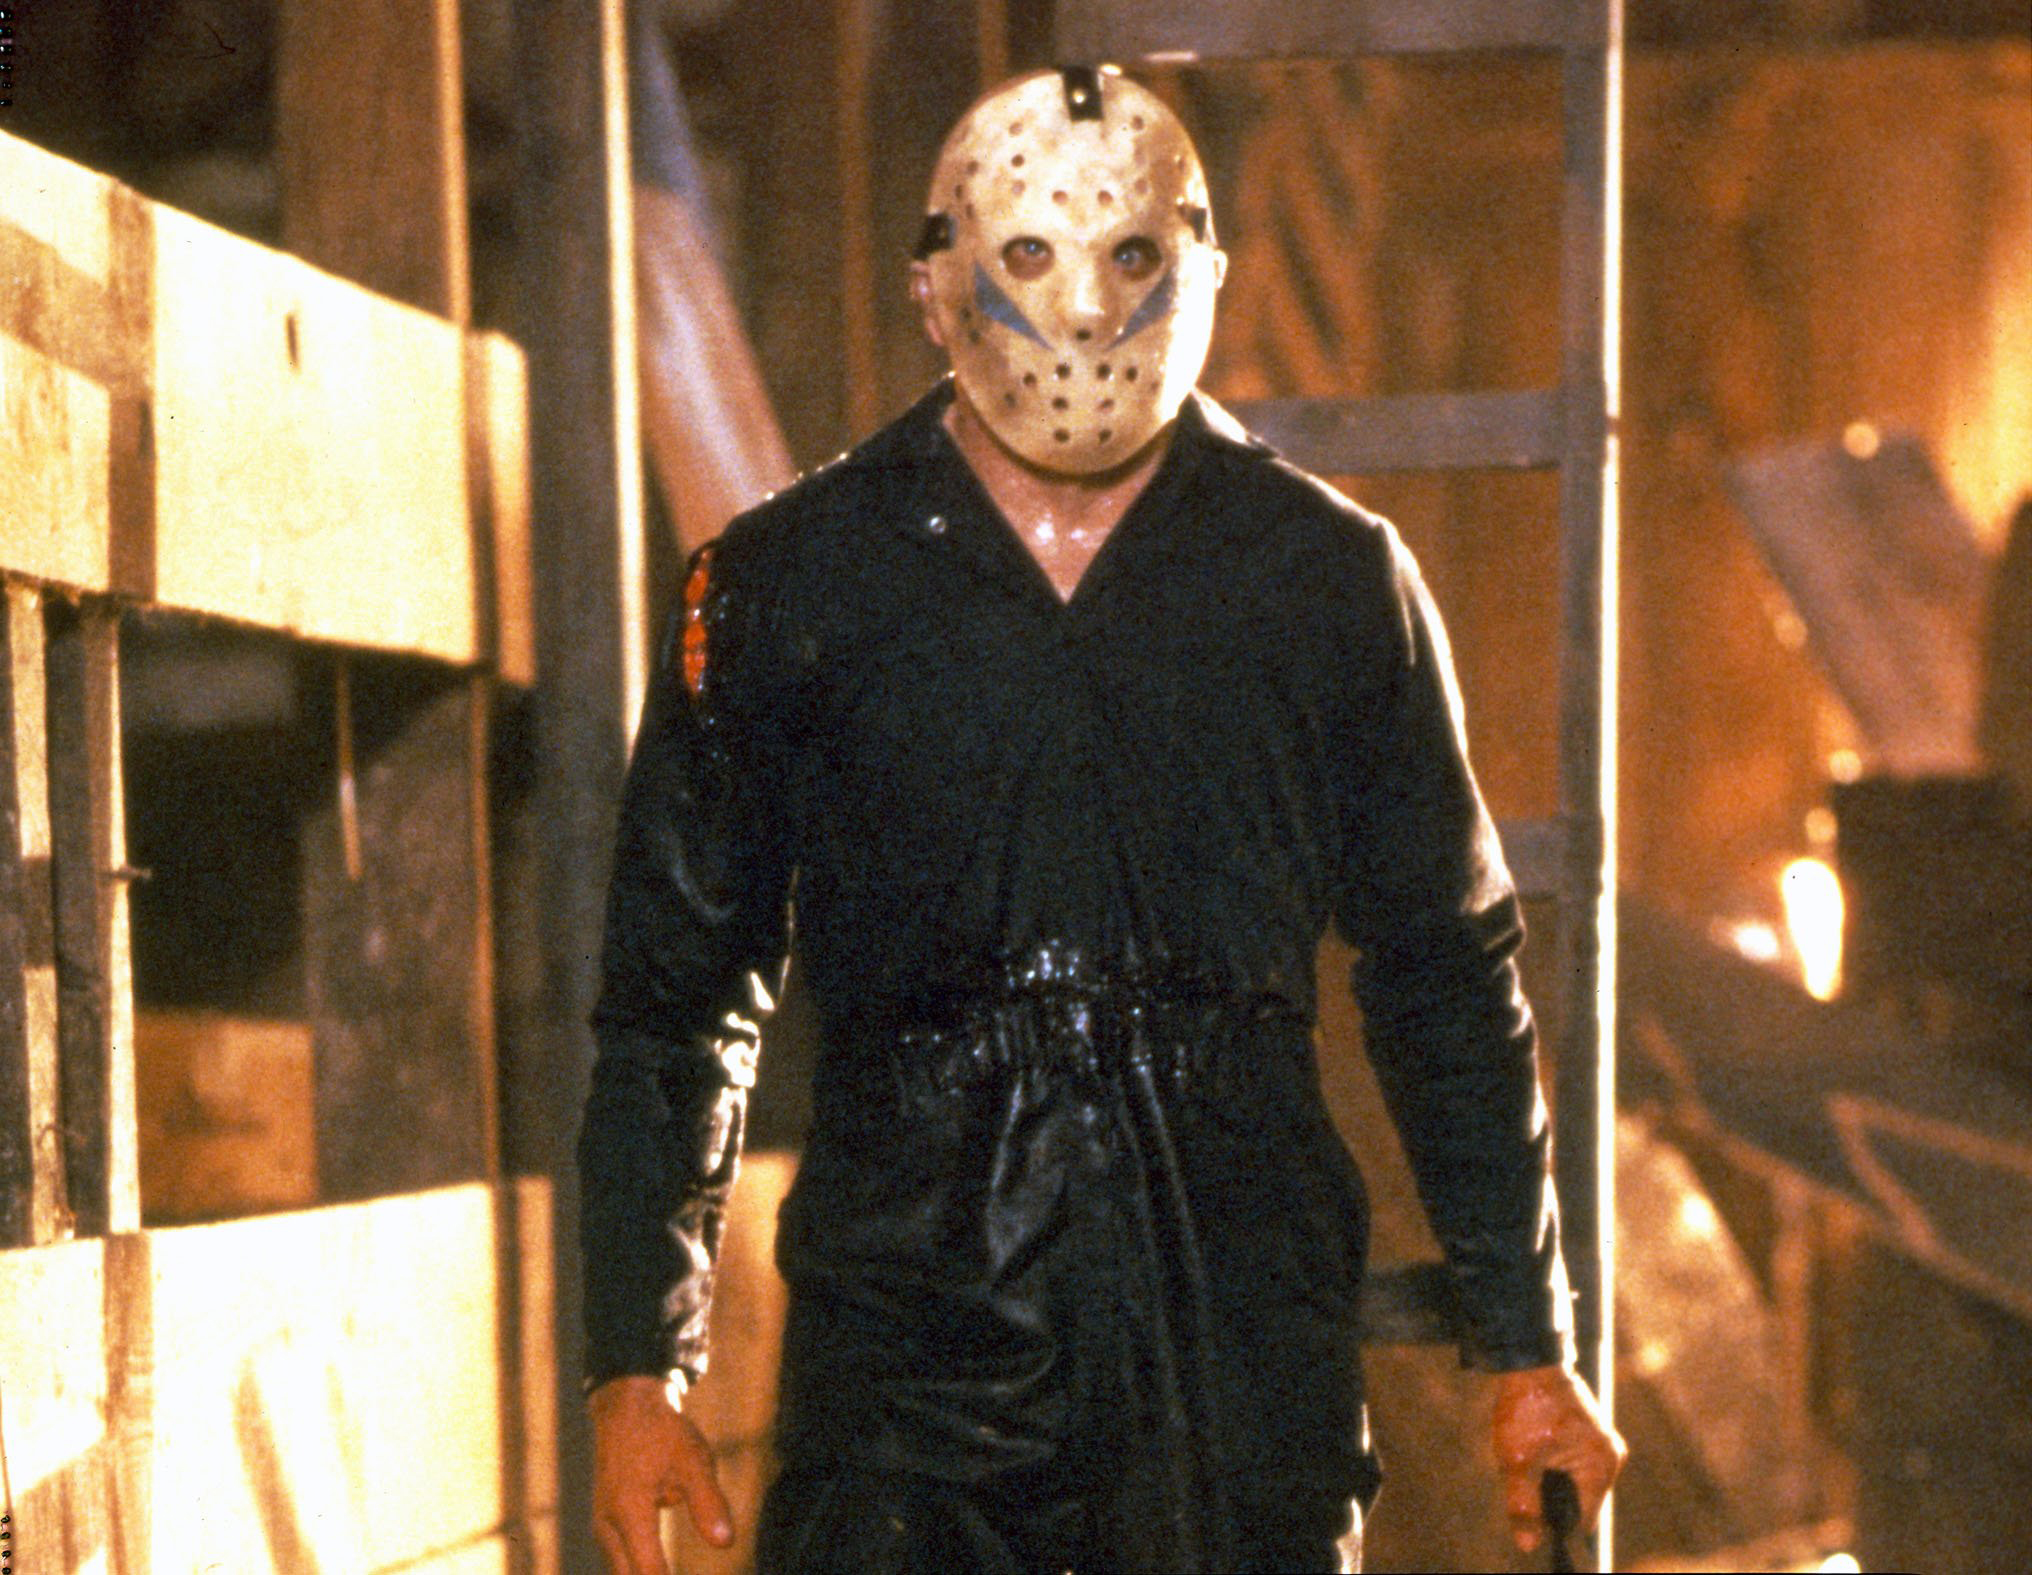 Even If You're Not Superstitious, This Friday the 13th Could Be Scary for Stocks